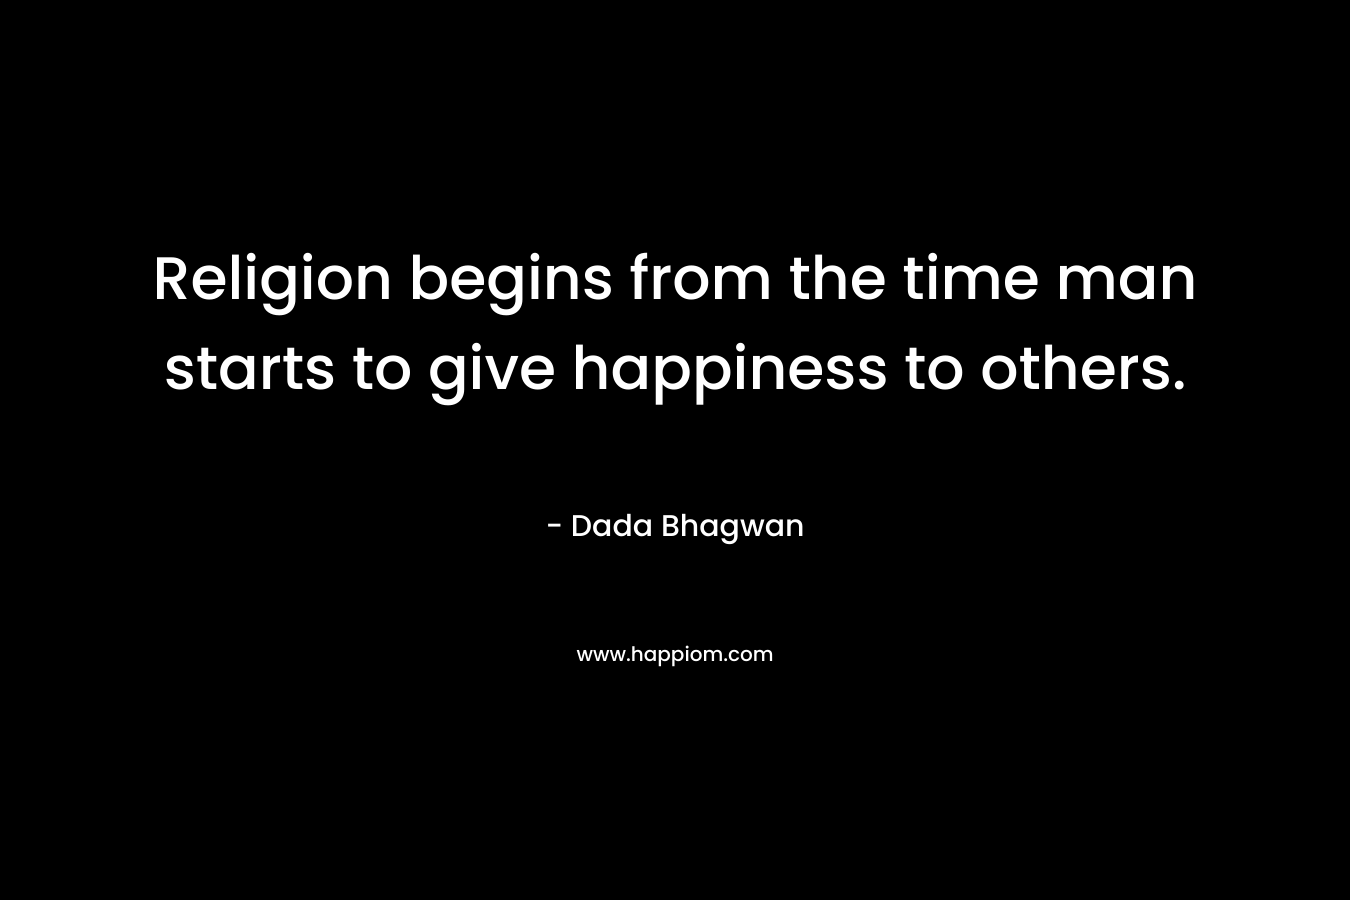 Religion begins from the time man starts to give happiness to others.